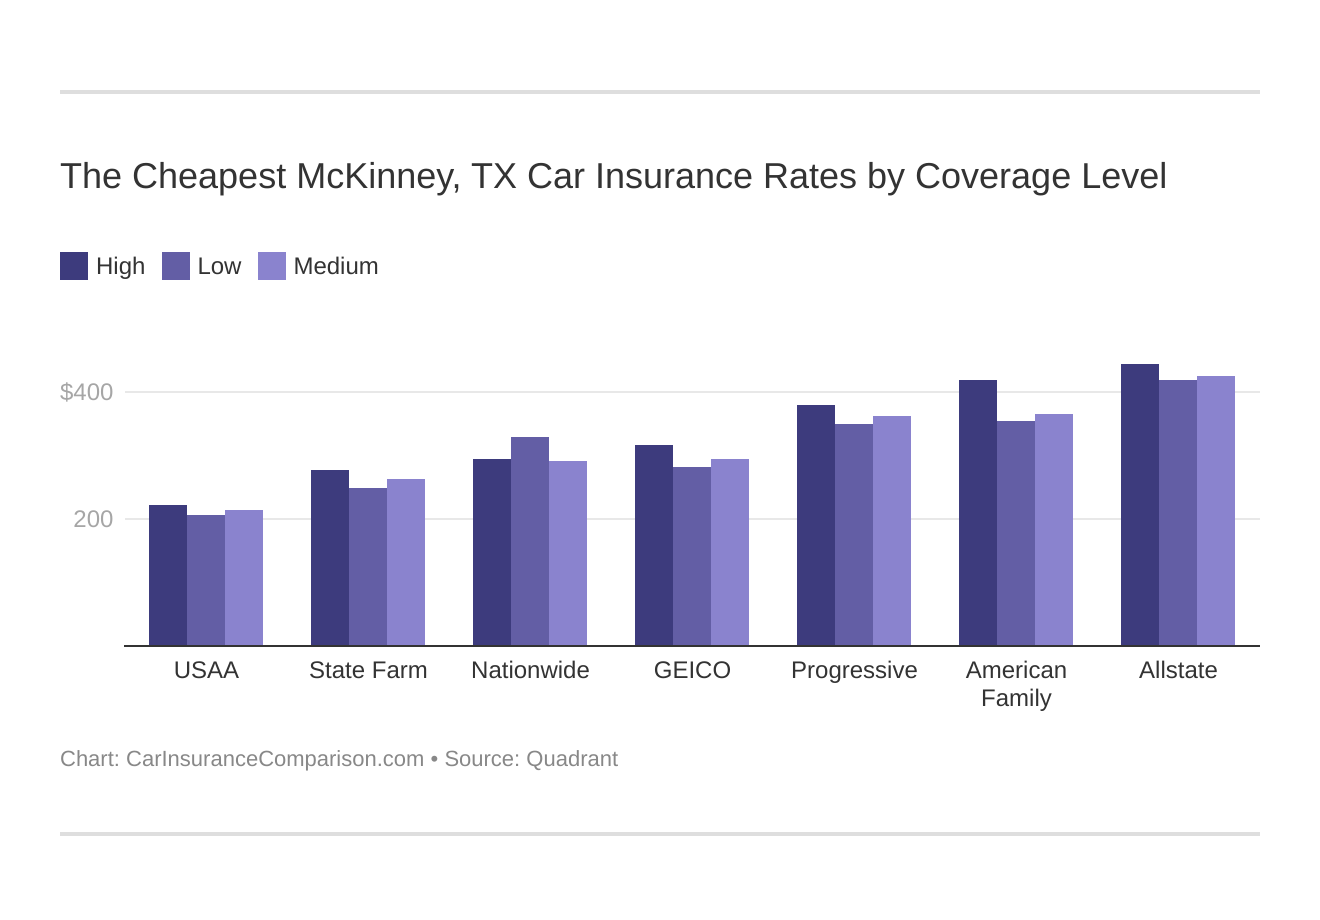 The Cheapest McKinney, TX Car Insurance Rates by Coverage Level